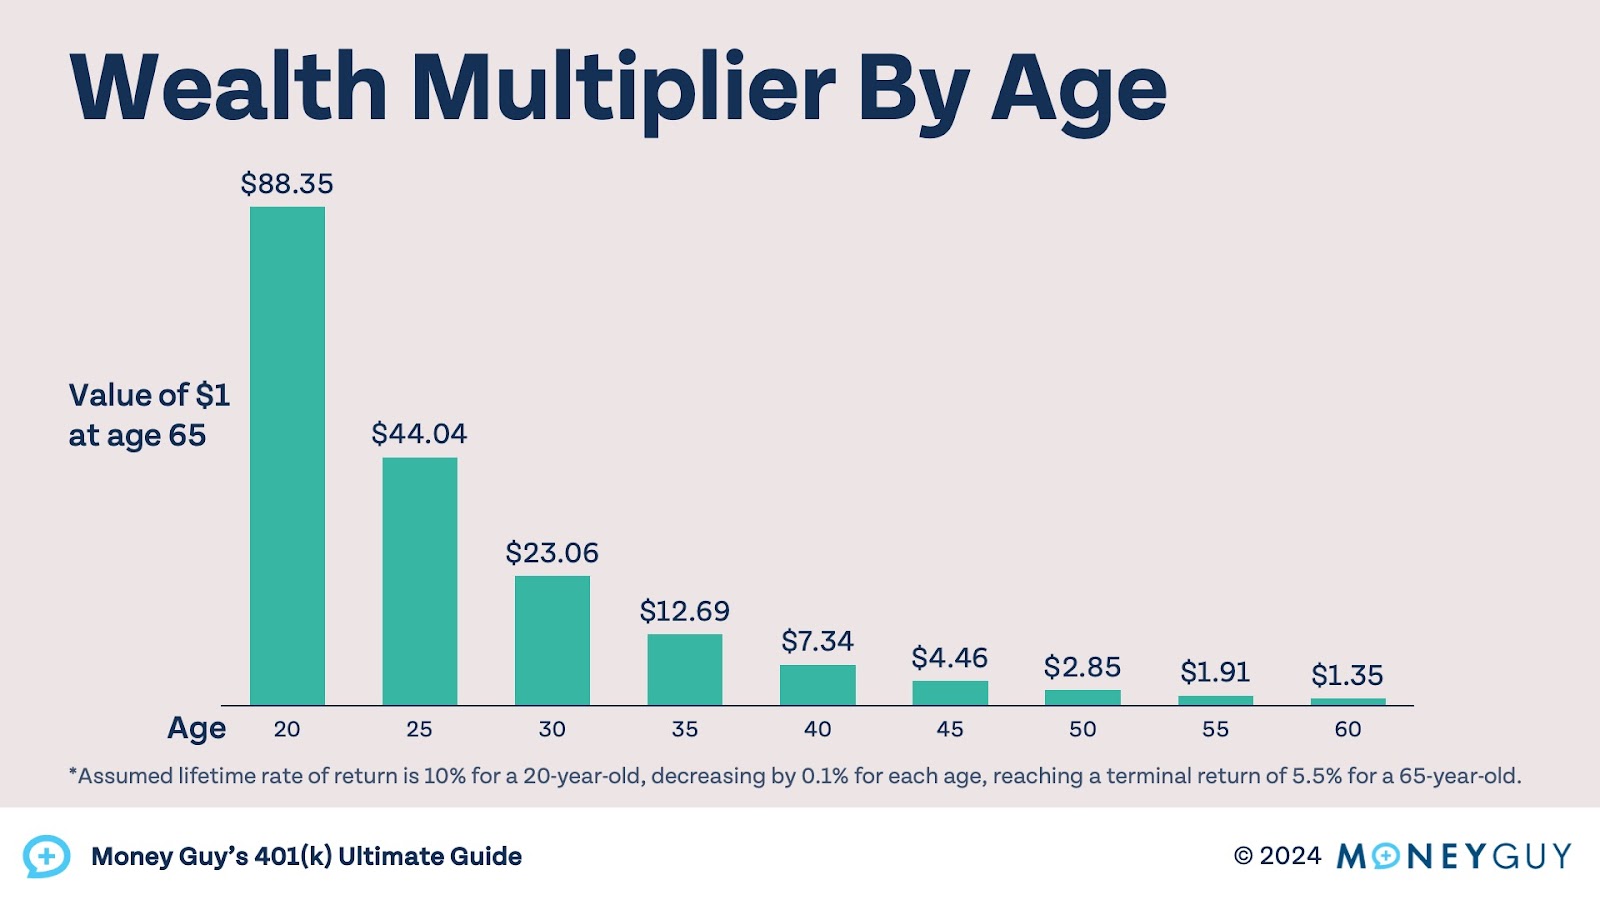 A chart showing the wealth multiplier, or power of someone's invested dollars, by age.